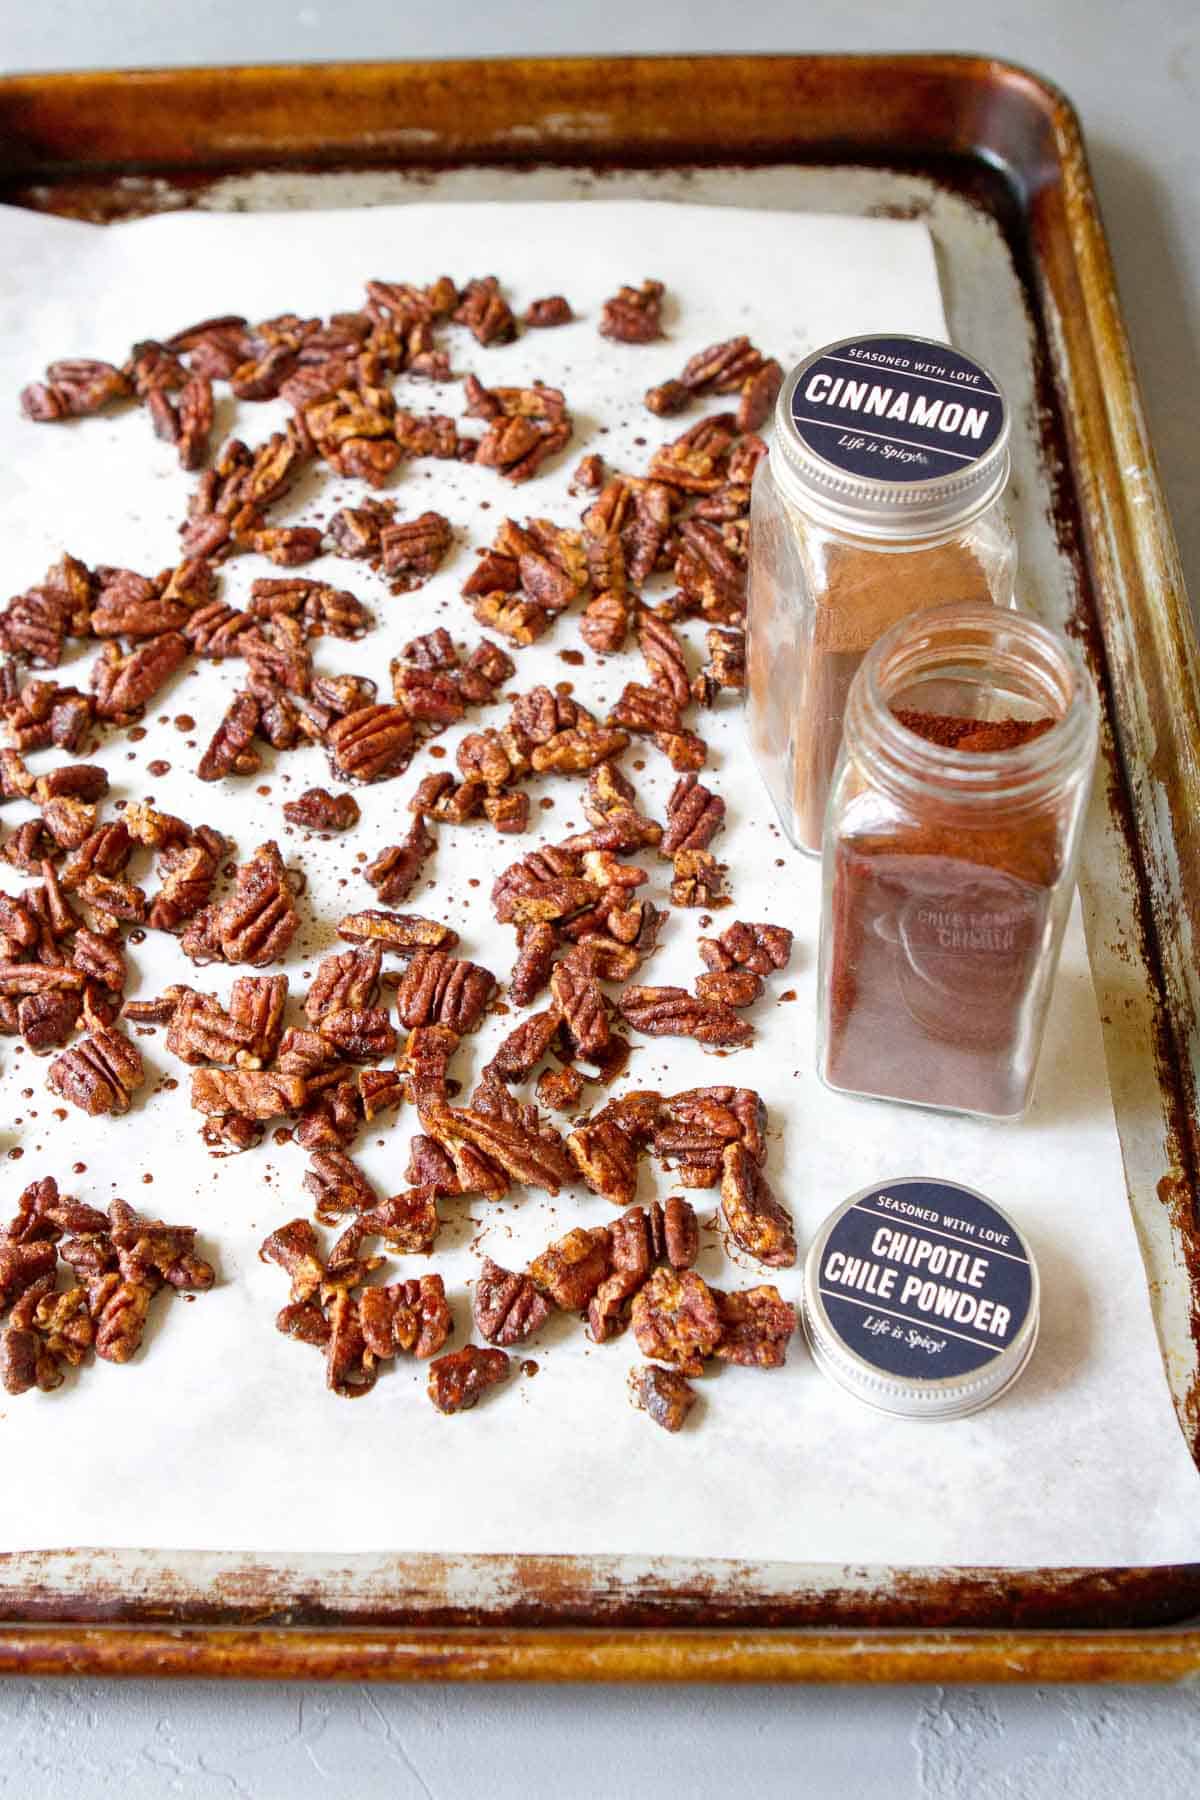 Chopped spiced pecans on a baking sheet lined with parchment paper. Spice bottles on the side.